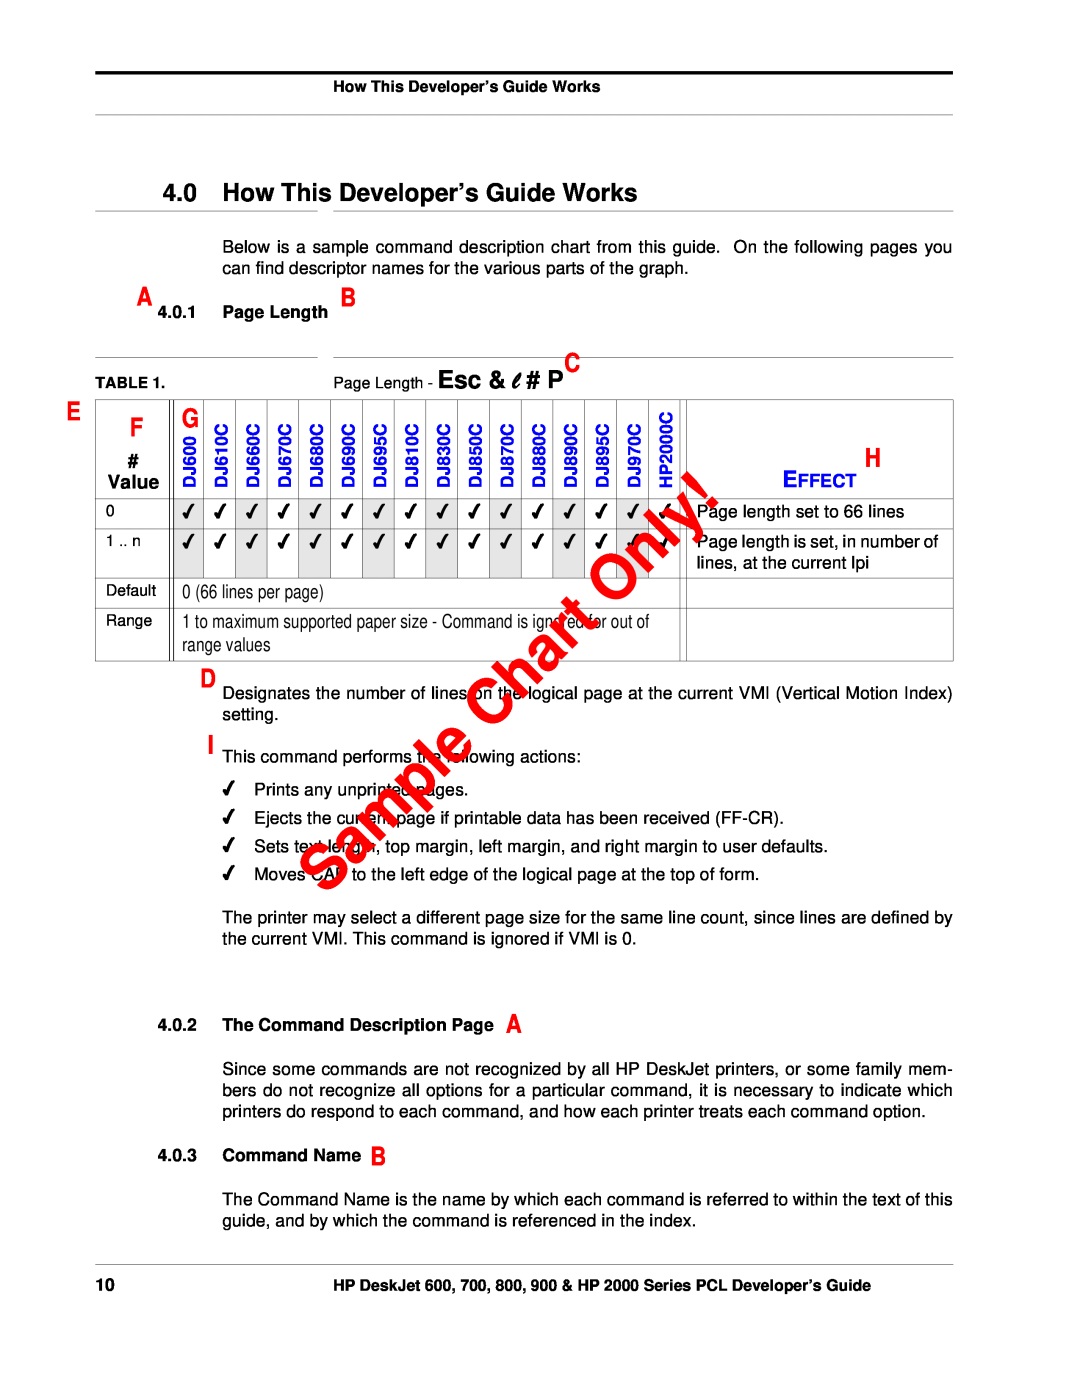 HP 800 How This Developer’s Guide Works, Value, Effect, range values, Page Length, Page length set to 66 lines, setting 